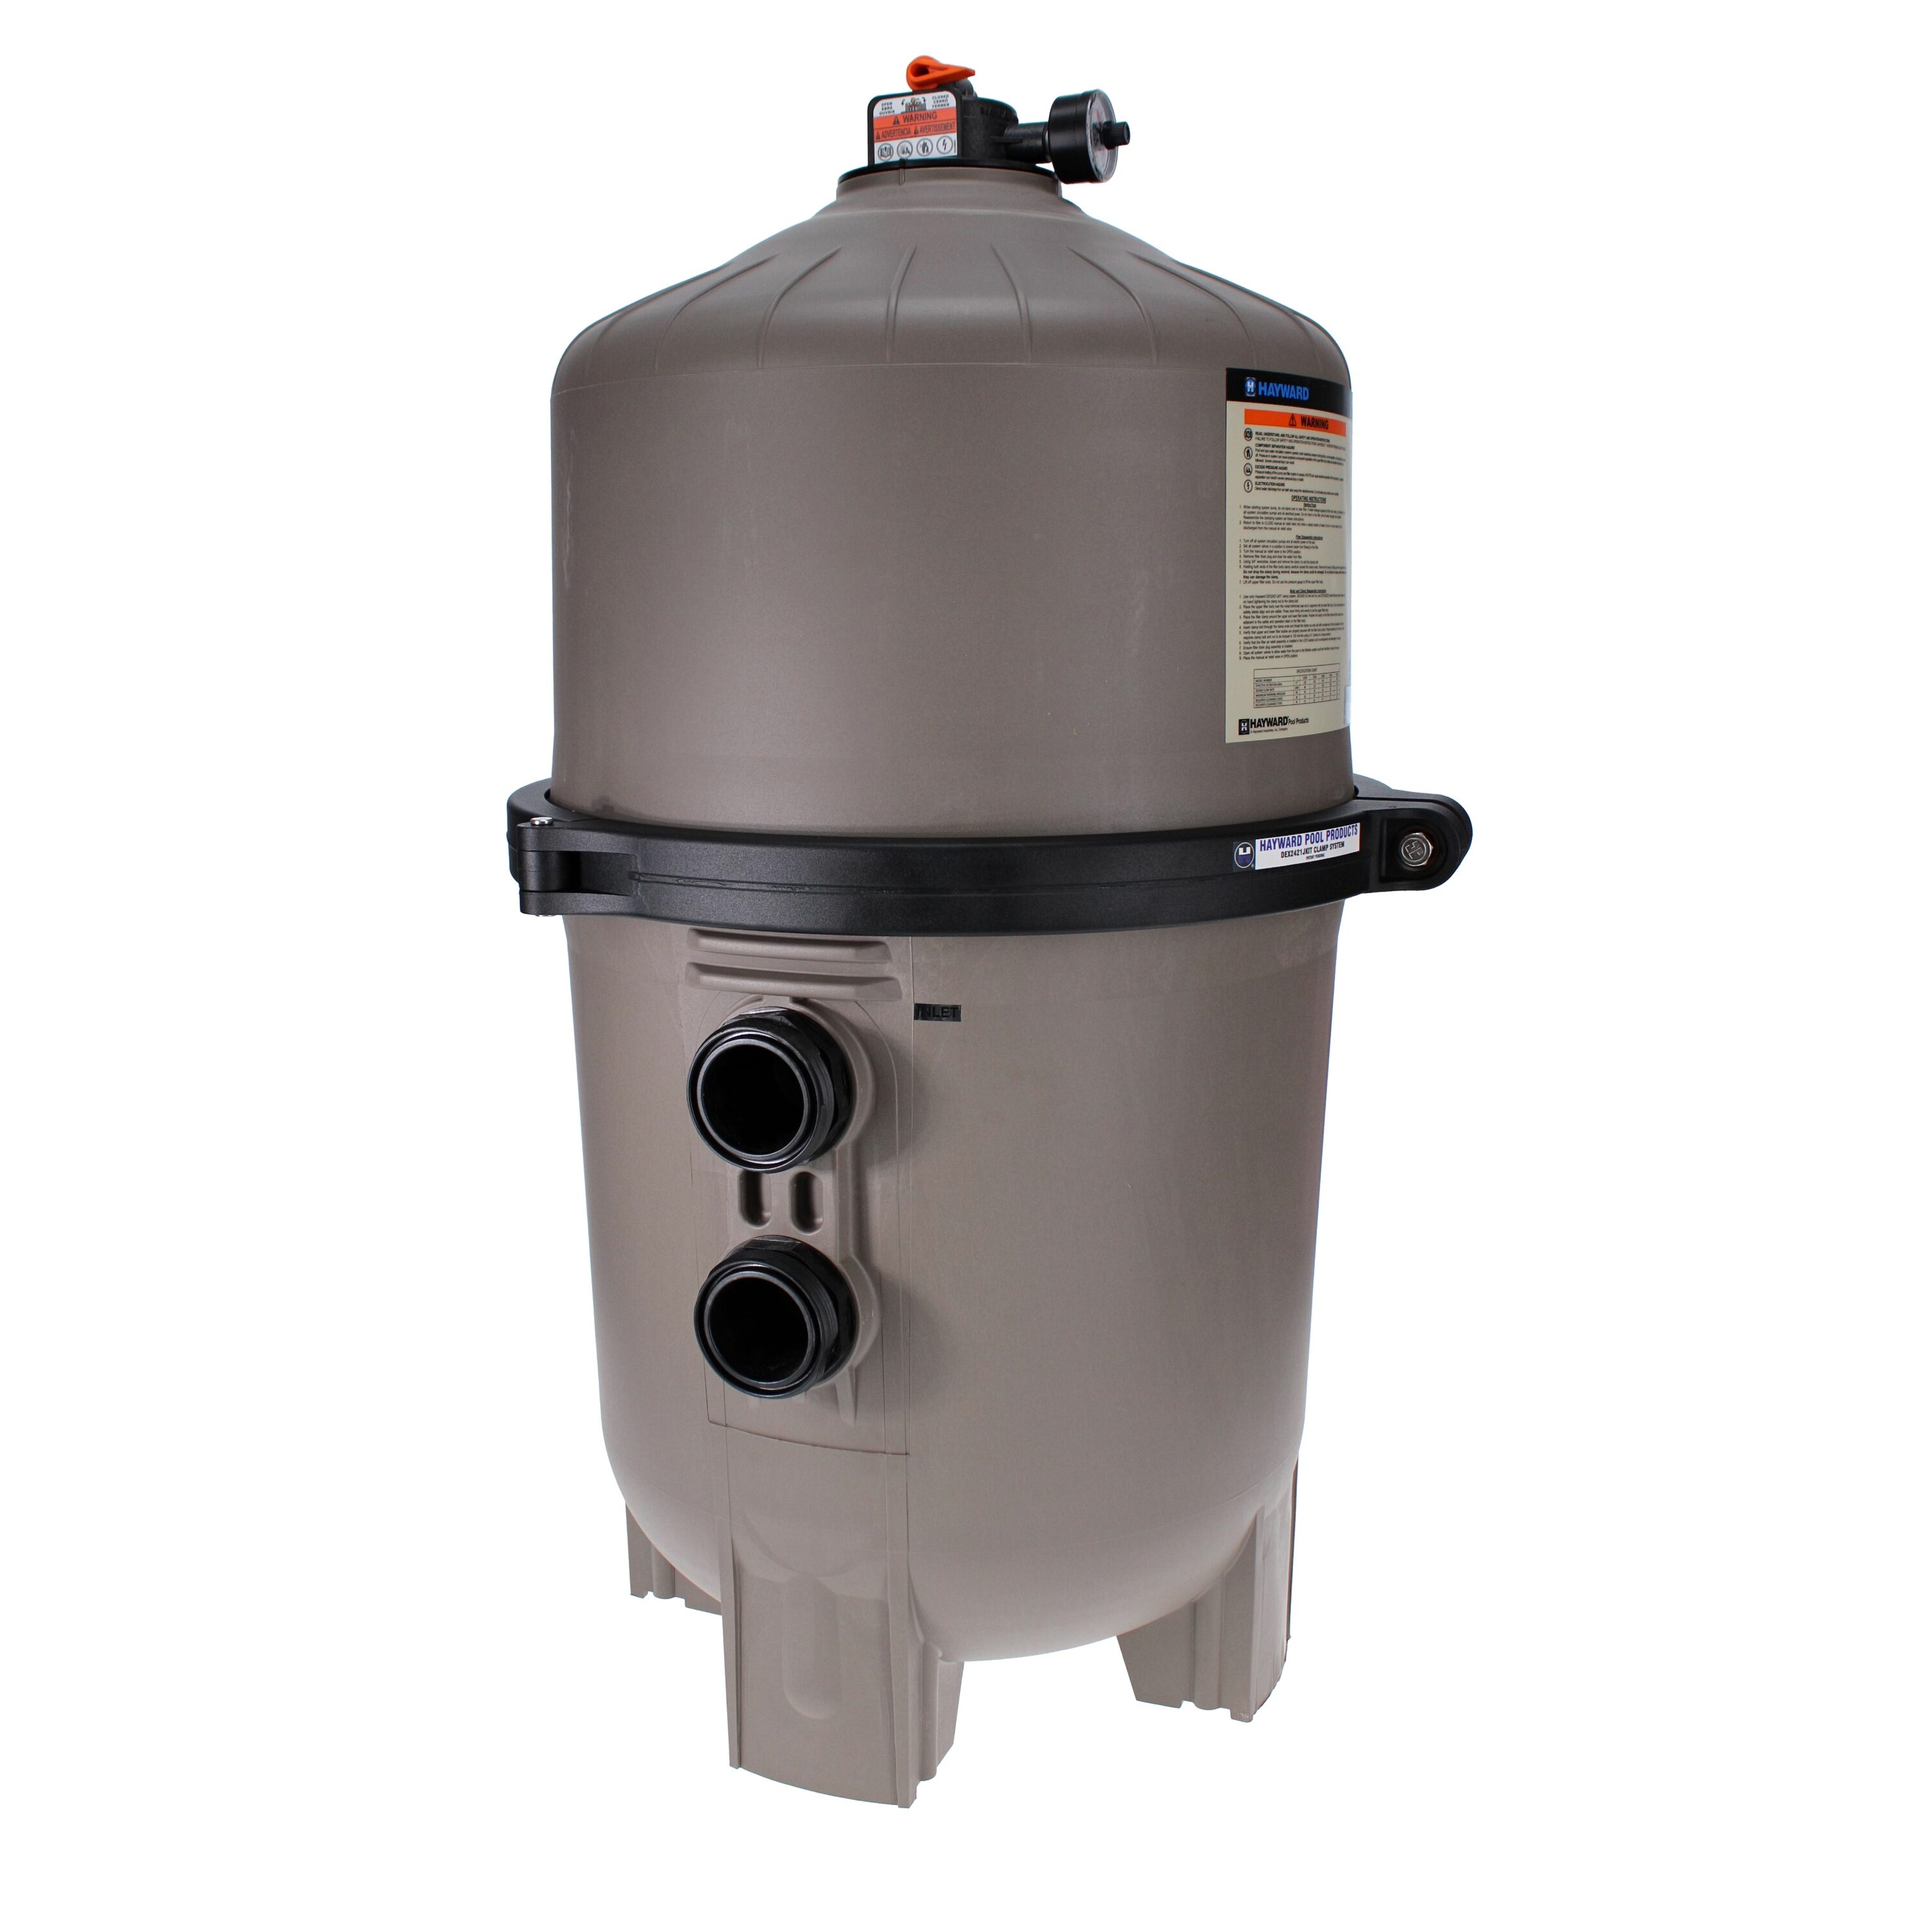 Blue Wave Hydromatic 120 SF Above Ground Pool Cartridge Filter System with  1.5 HP Pump - 1.5 HP - Bed Bath & Beyond - 5748745